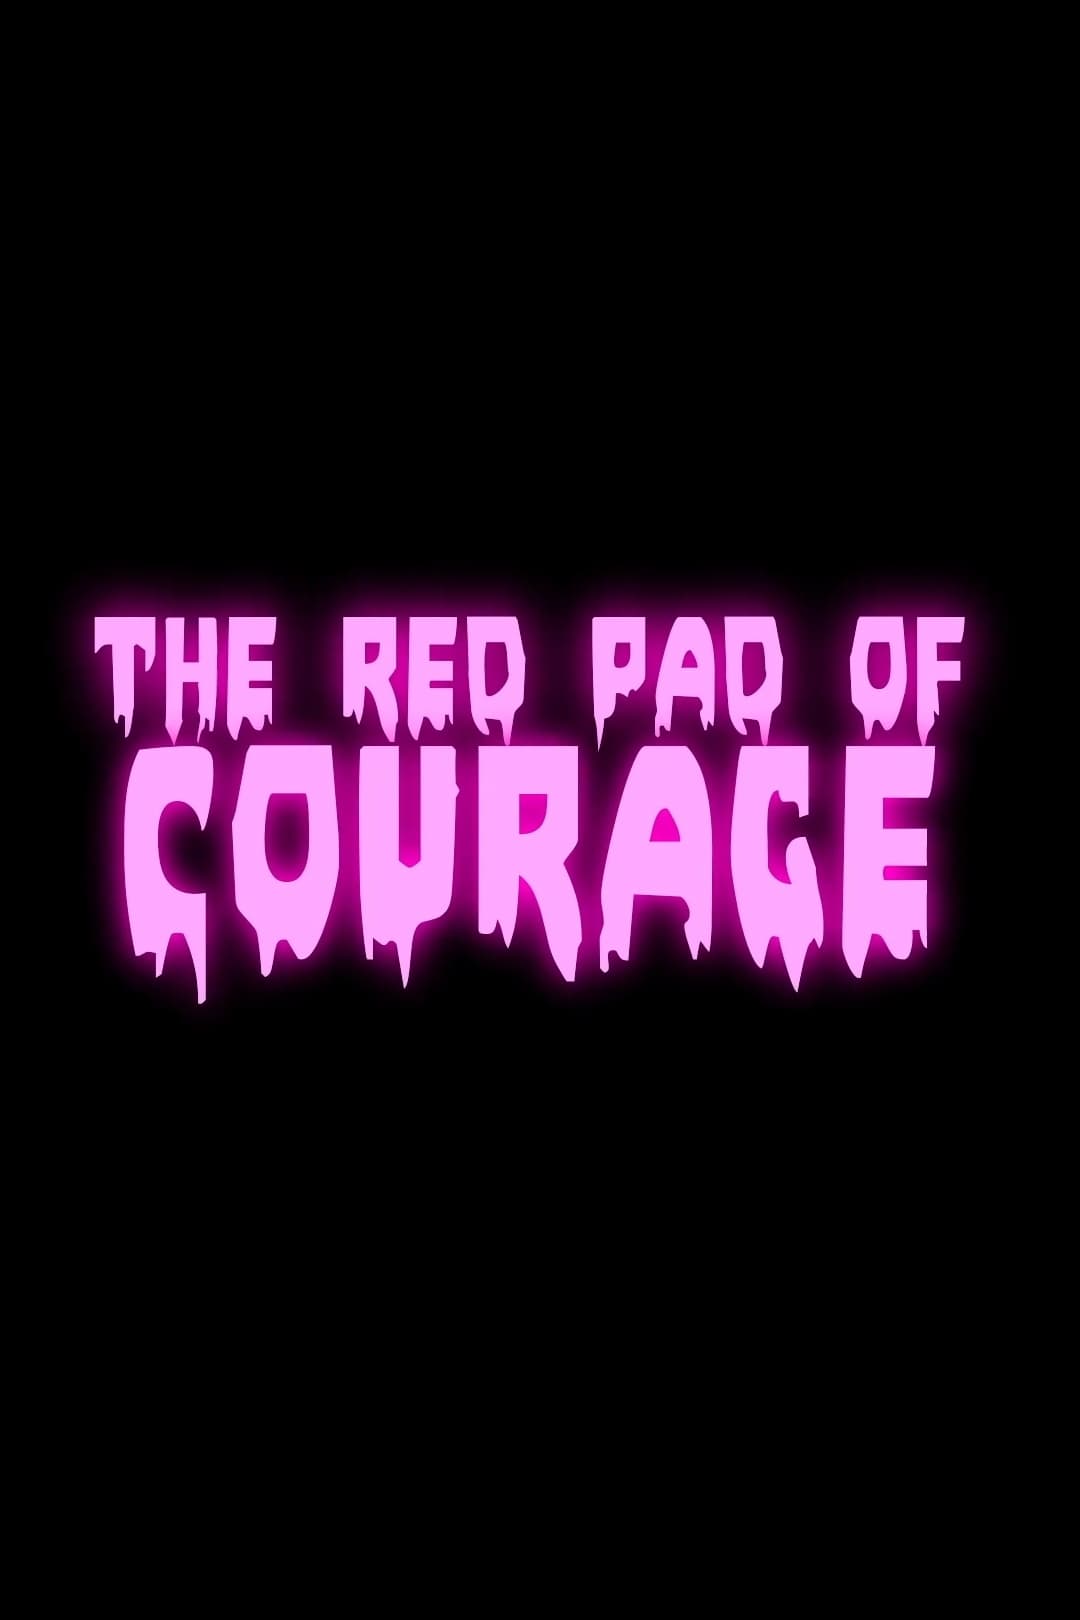 The Red Pad of Courage